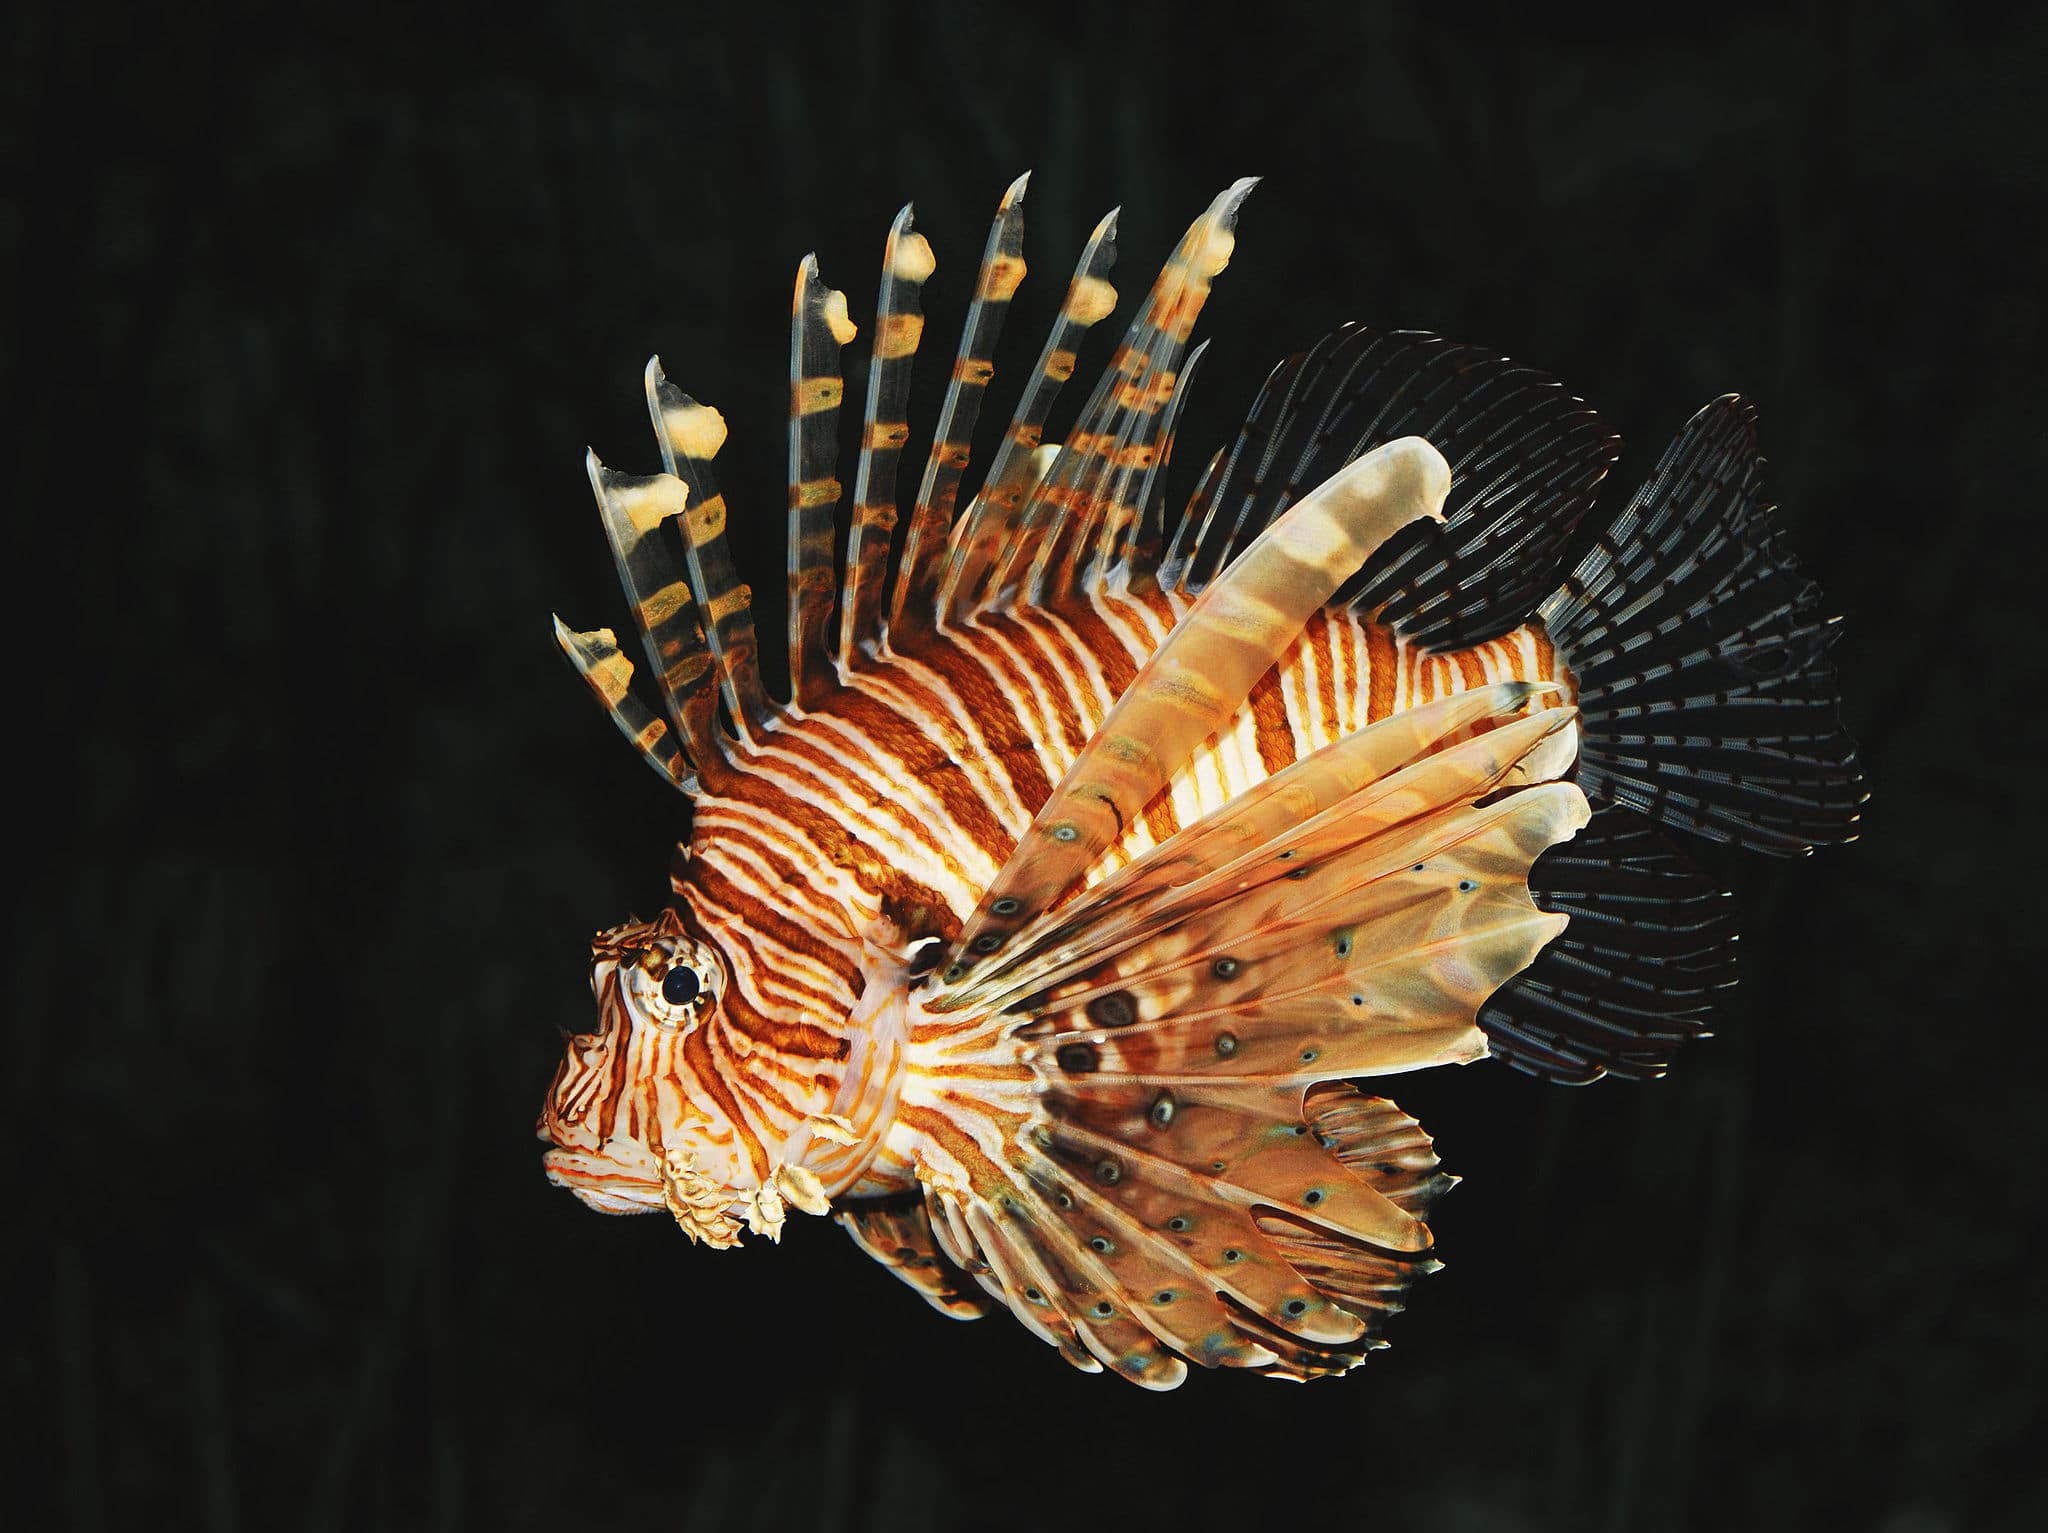 Curacao Aims To Turn Invasive Lionfish Into A Sustainable Industry ...